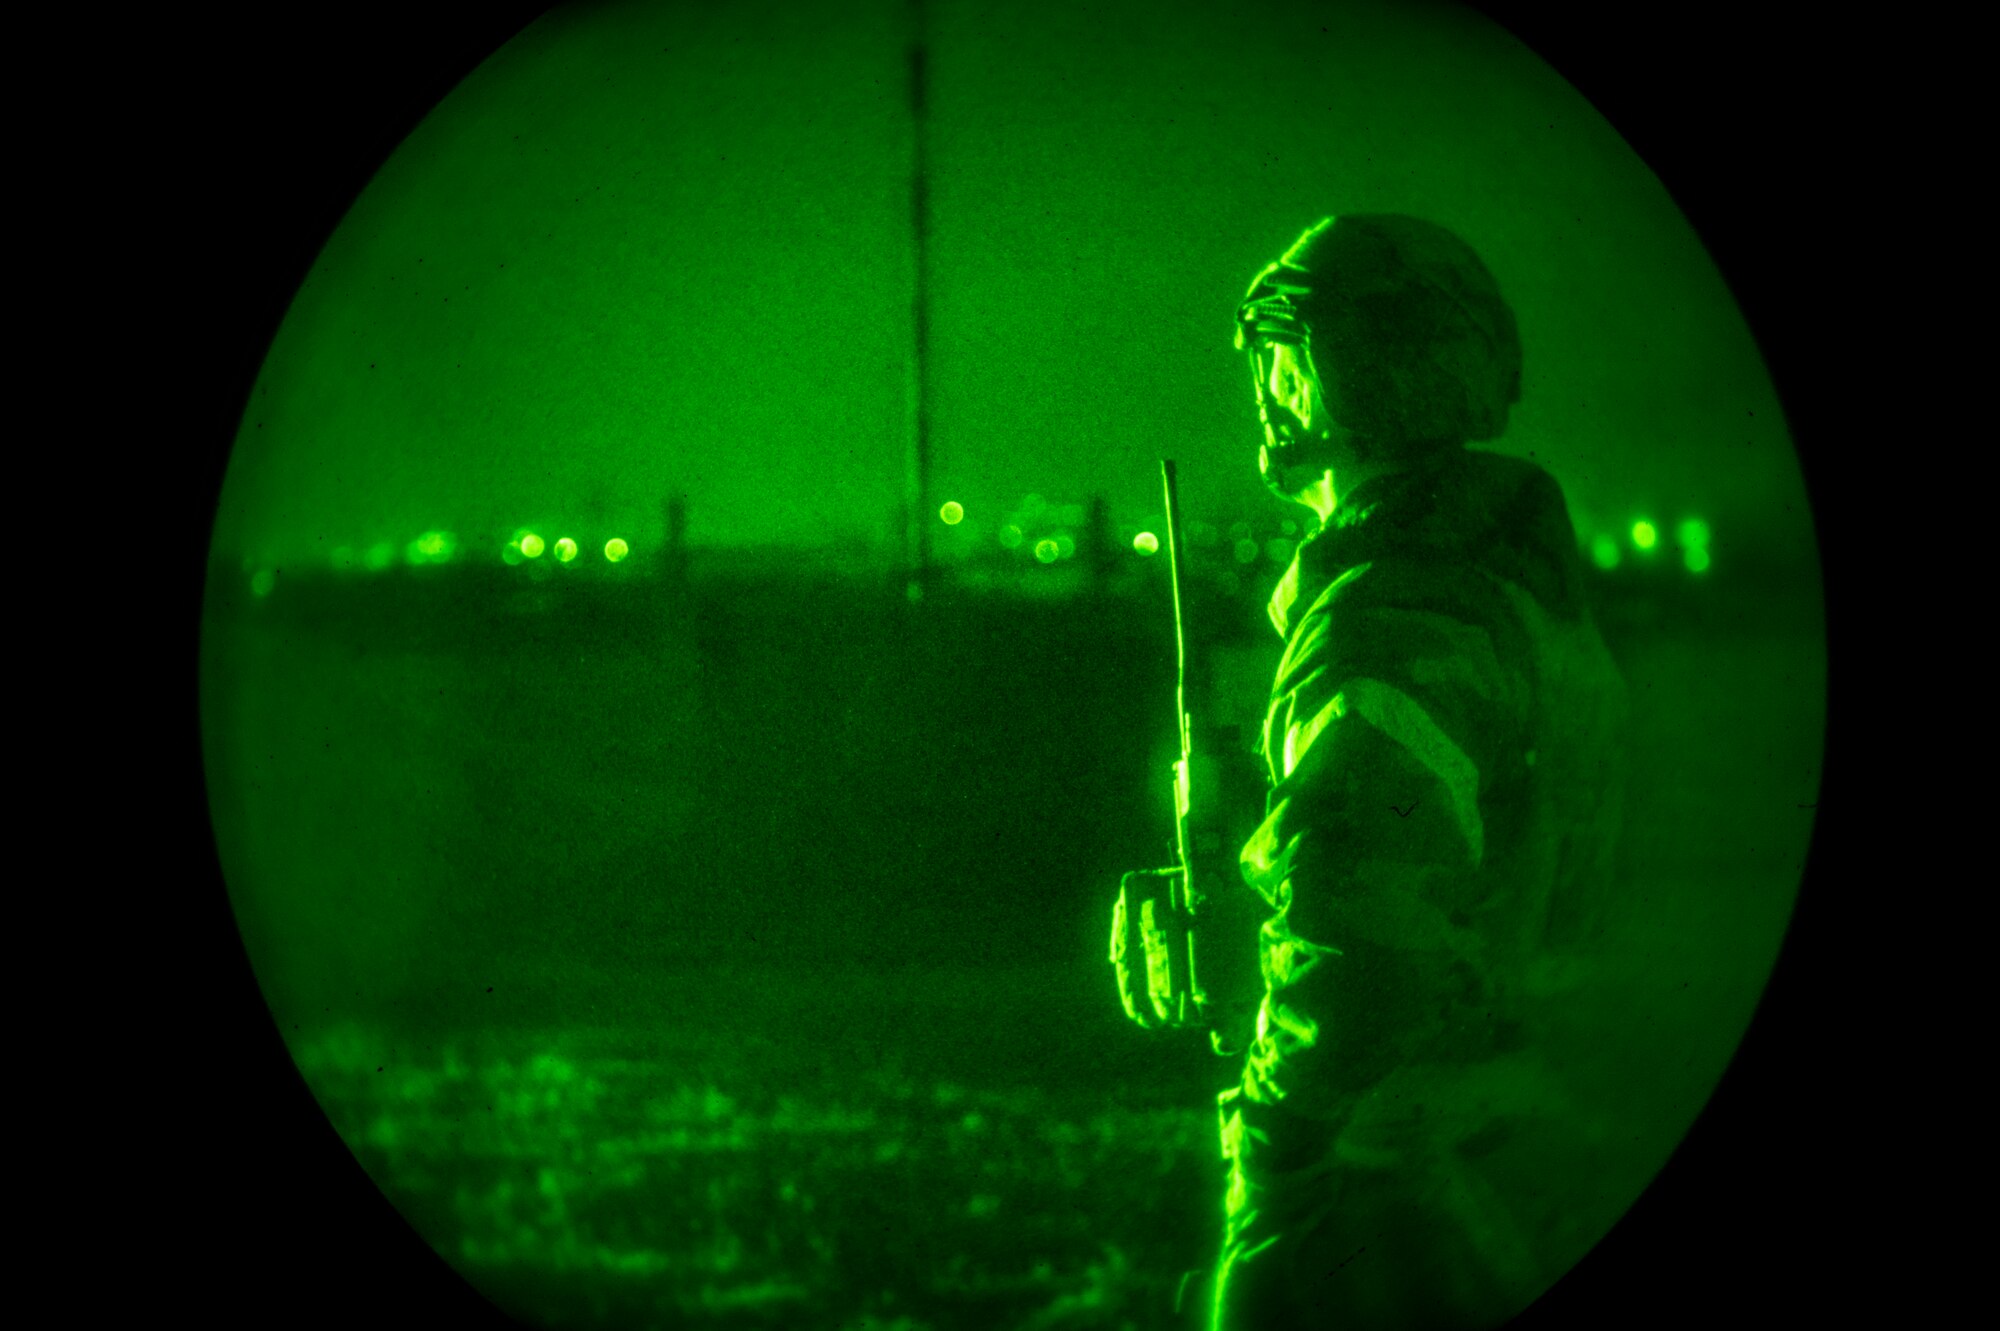 U.S. Air Force Tech Sgt. Tyler Hopkins, 51st Security Forces Squadron Wing Inspection Team member, observes Airmen during a night-time defend-the-base training scenario at Osan Air Base, Republic of Korea, Jan. 31 2023. Osan’s WIT ensures Airmen are mission capable by finding deficiencies during training events and making any corrections needed for future readiness. (U.S. Air Force photo by Airman 1st Class Aaron Edwards)